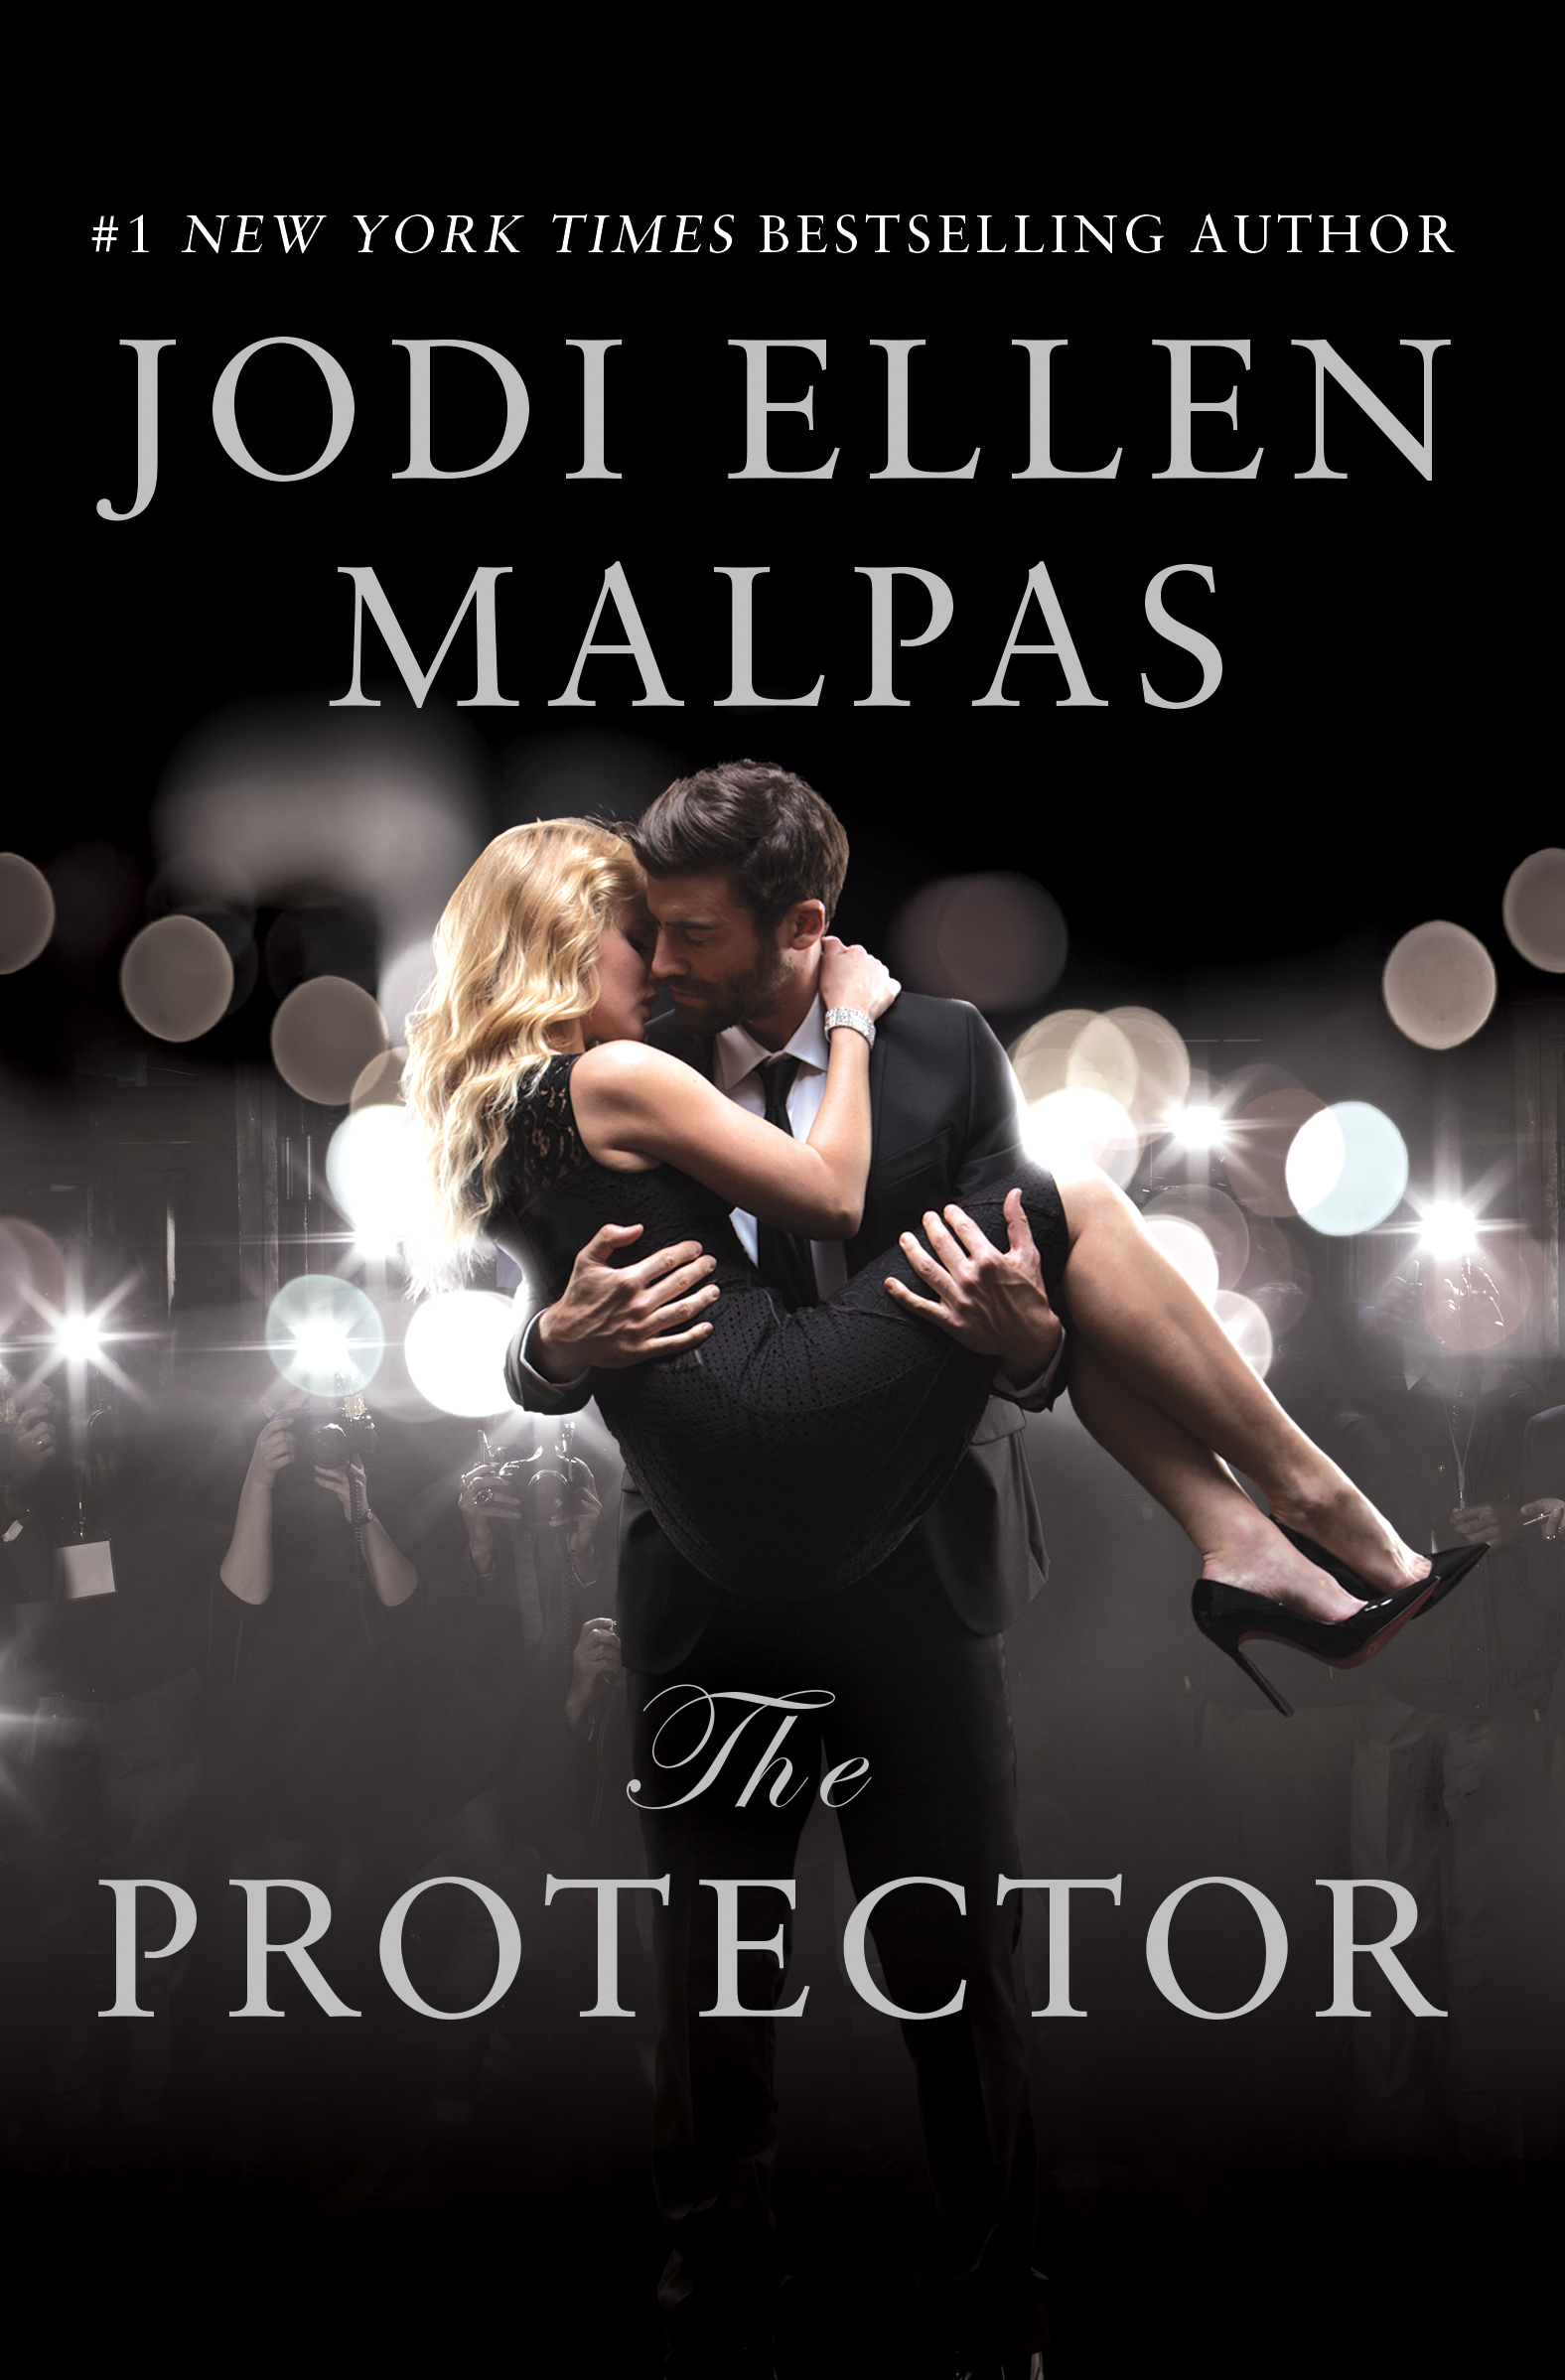 Romance Read The Protector #Giveaway #TheProtector - Classy Mommy